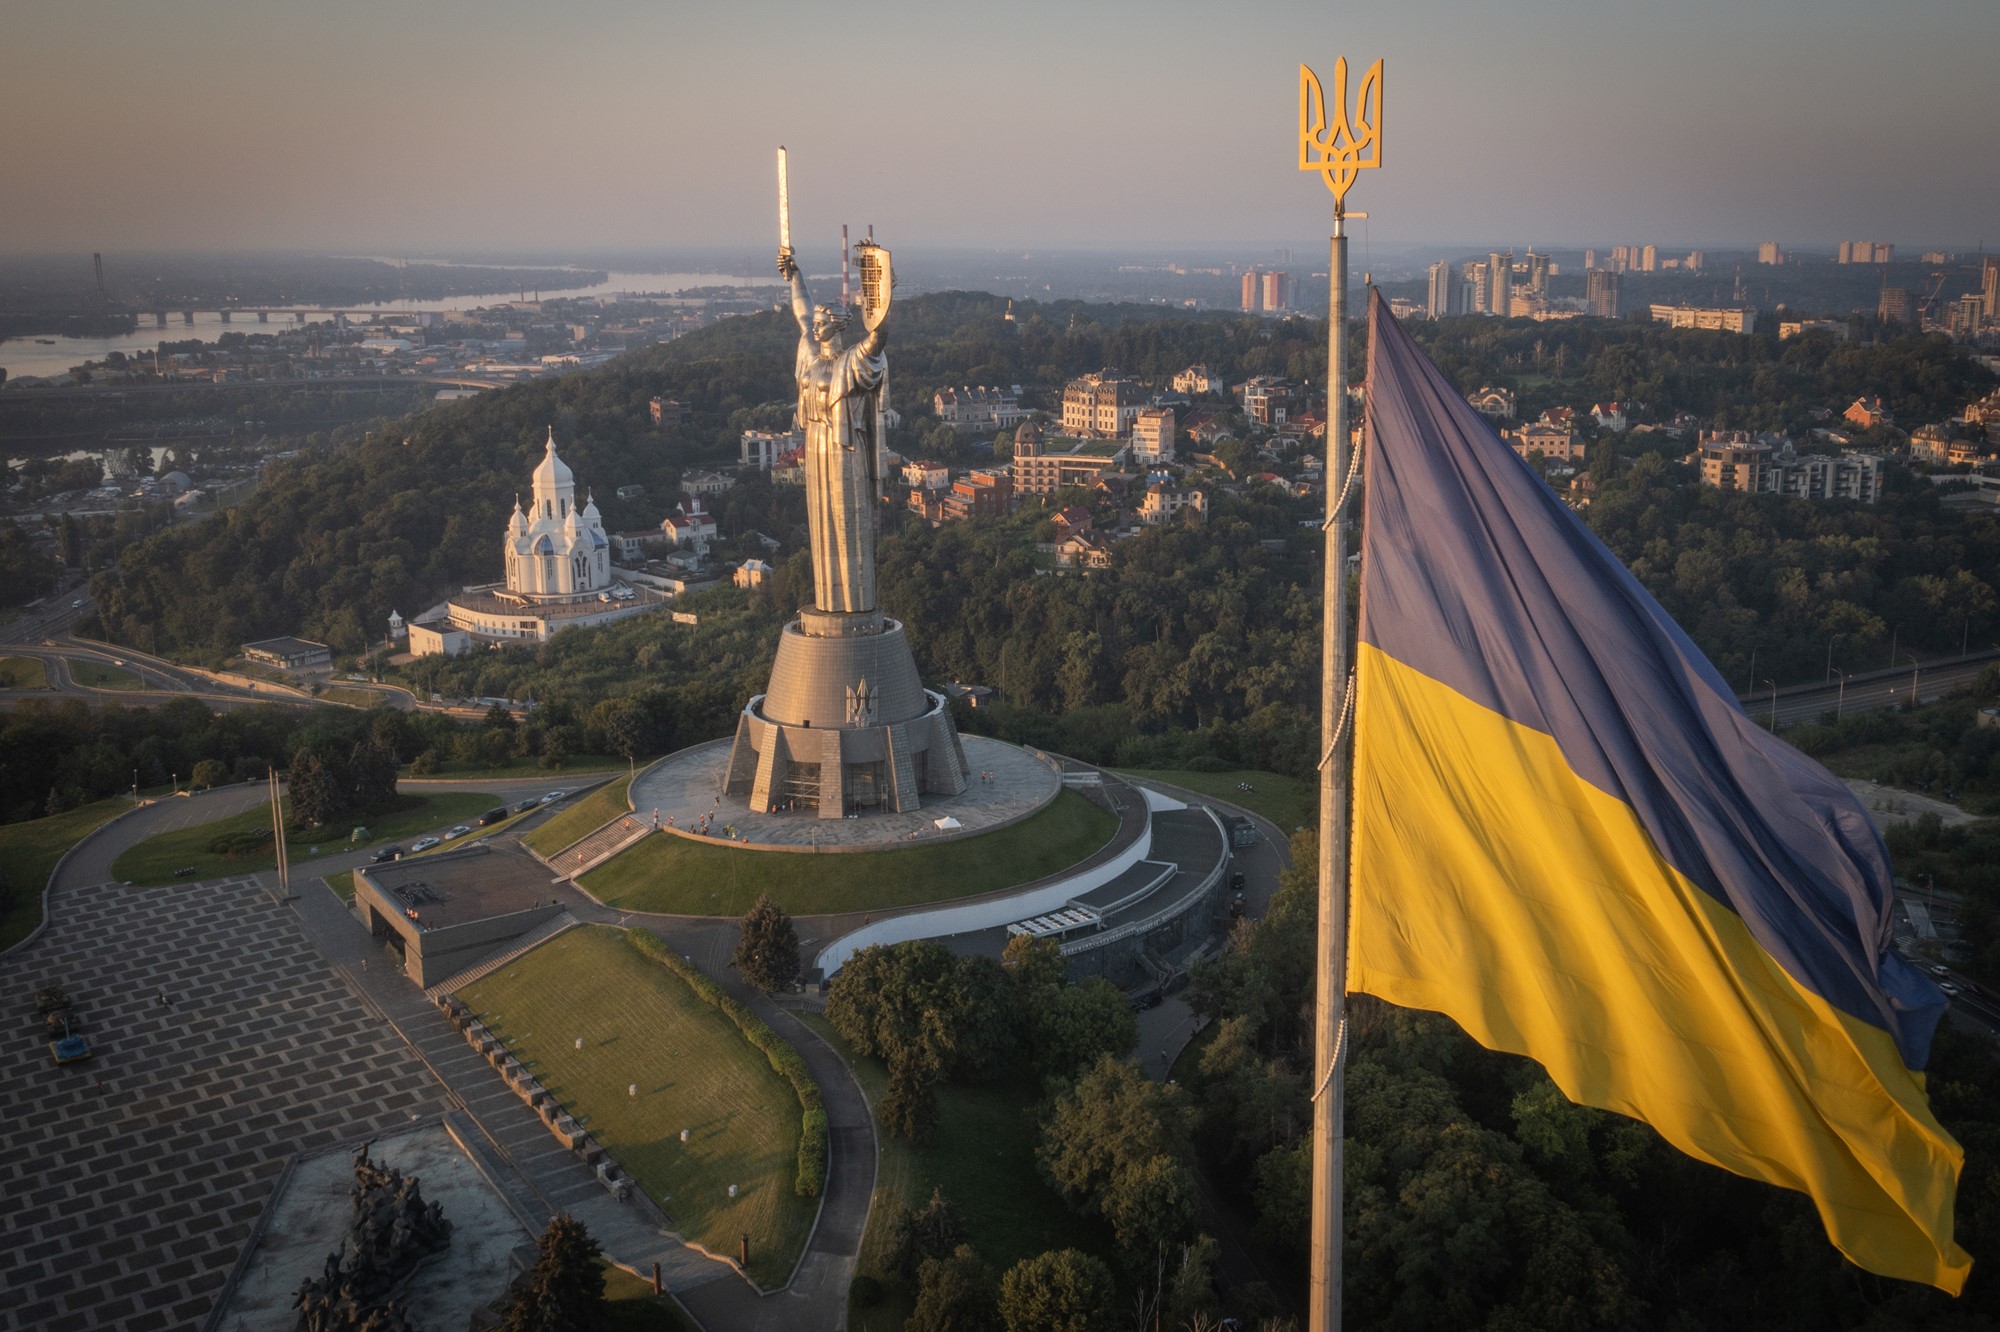 A wide photo of a tall statue of a woman holding a sword and shield. In the foreground is a tall Ukrainian flag